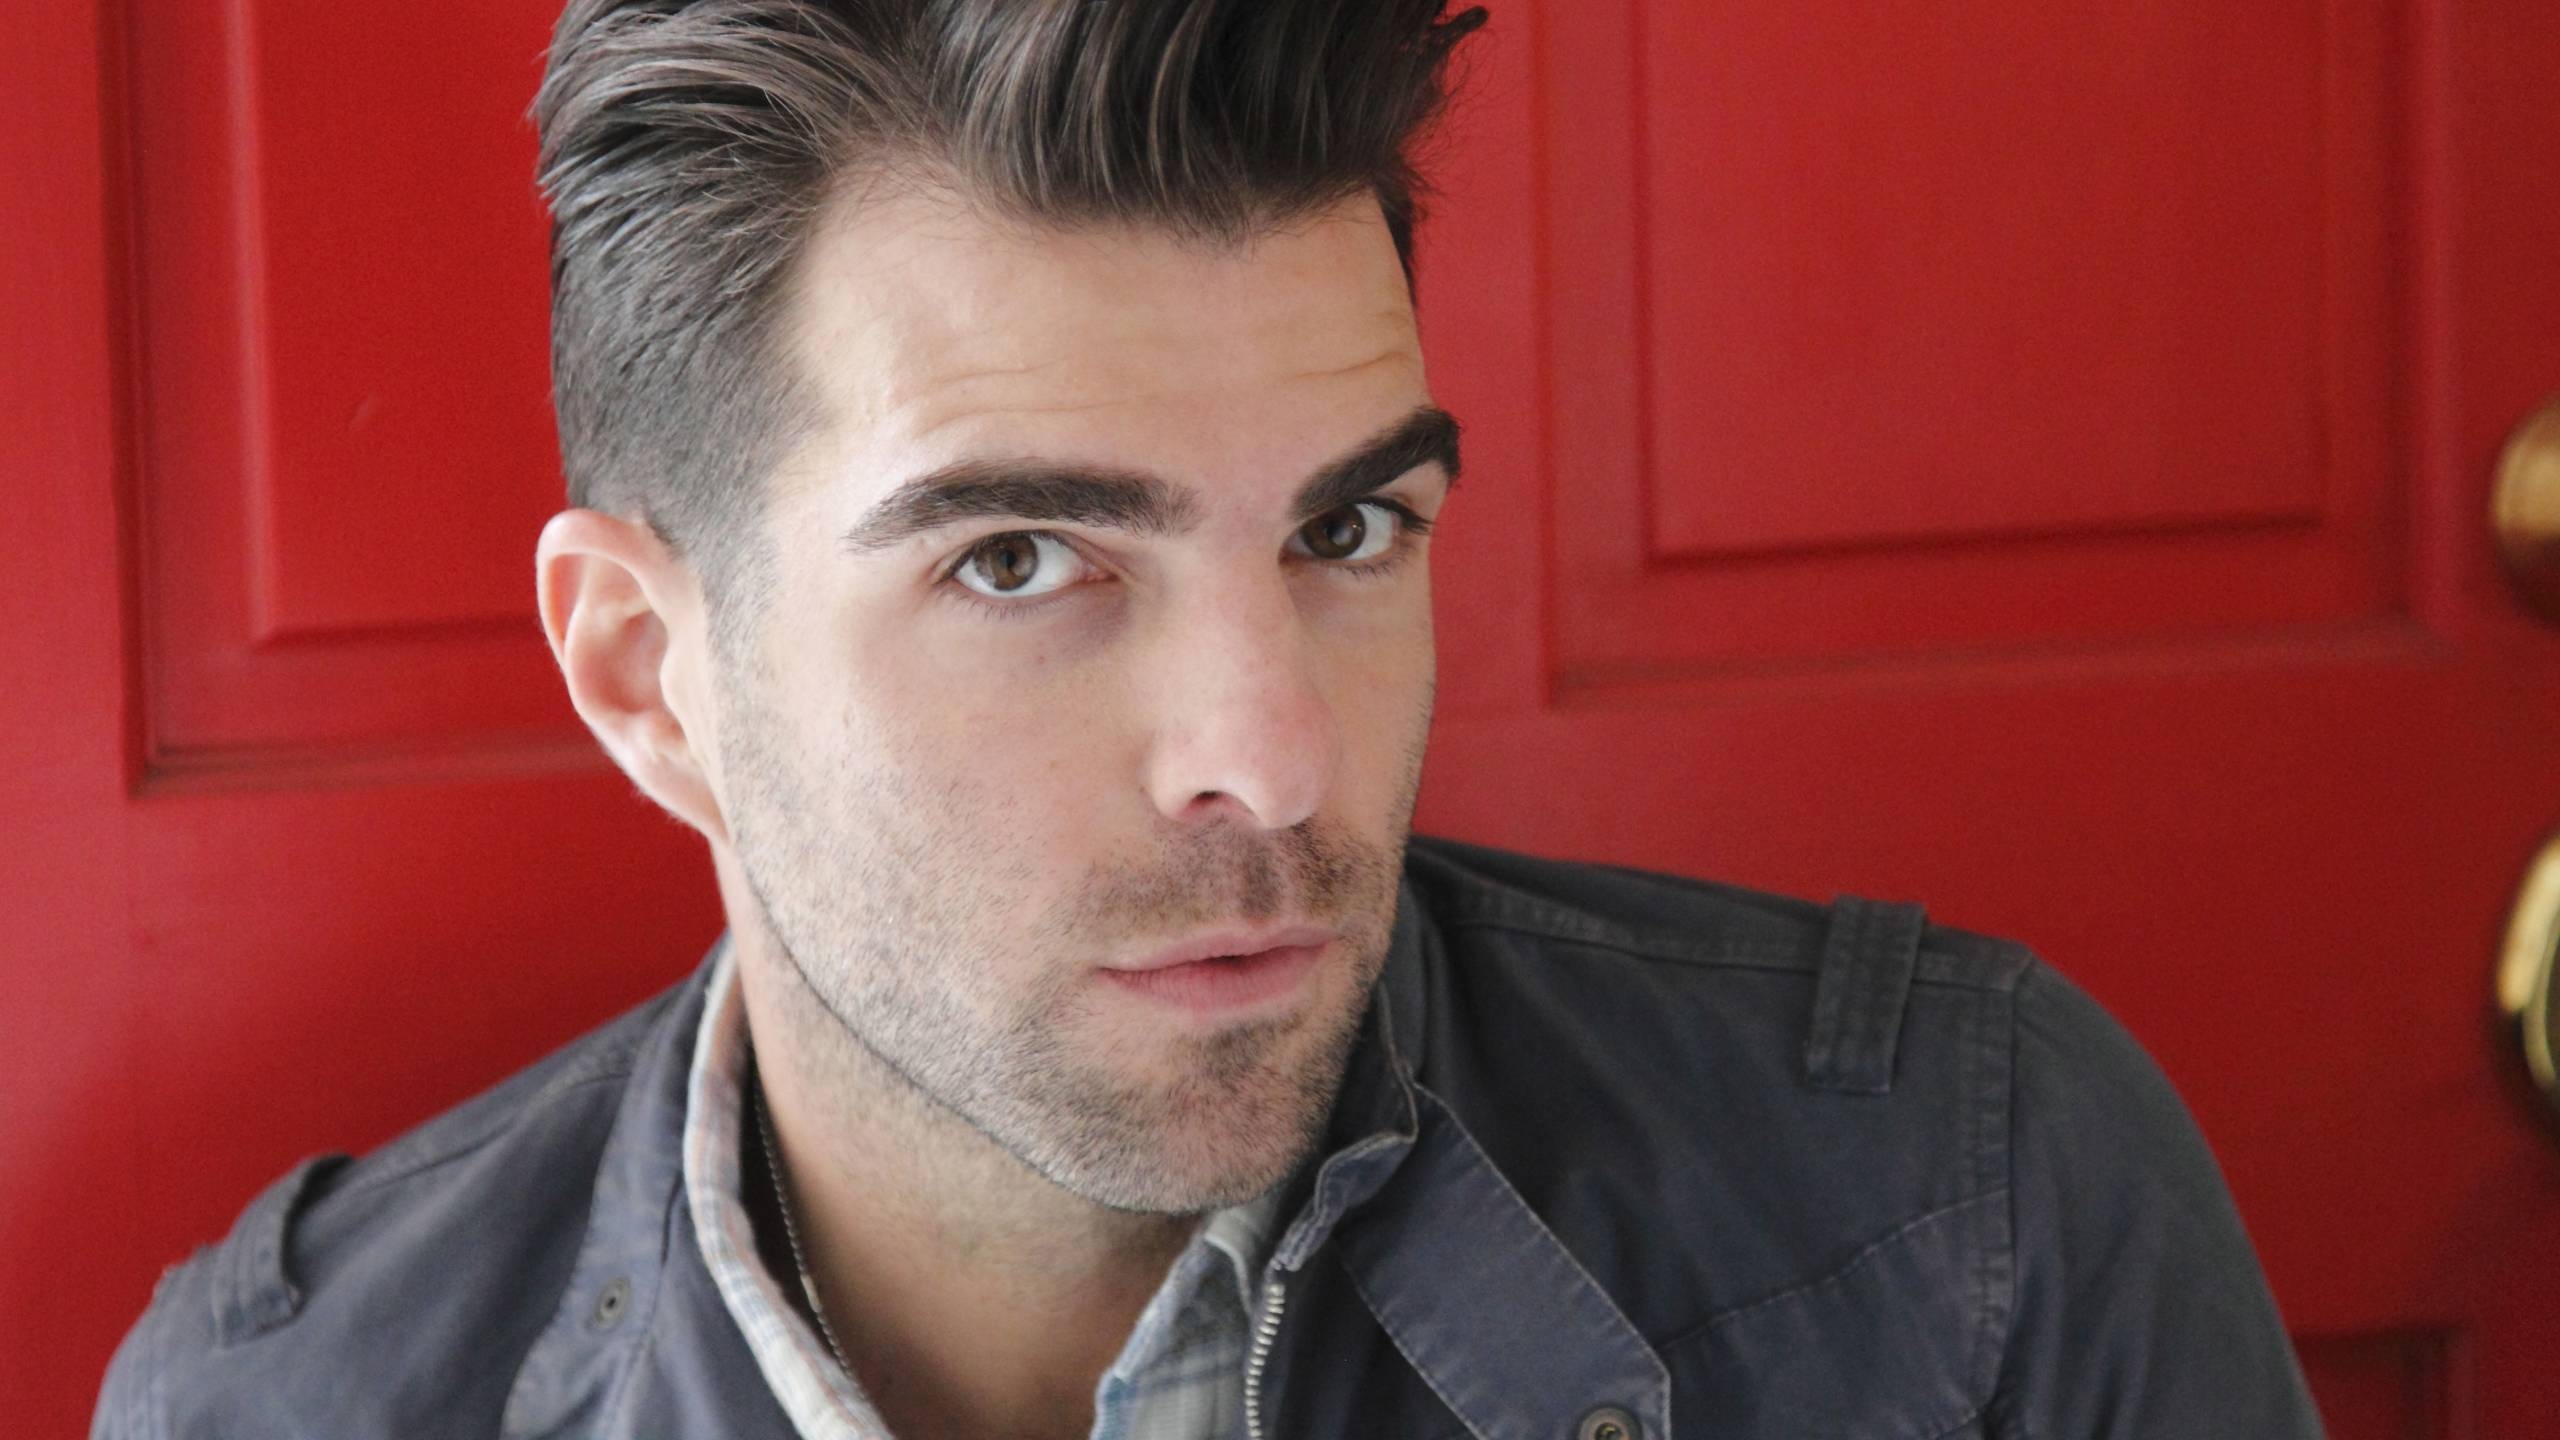 Zachary Quinto Pose for 2560x1440 HDTV resolution